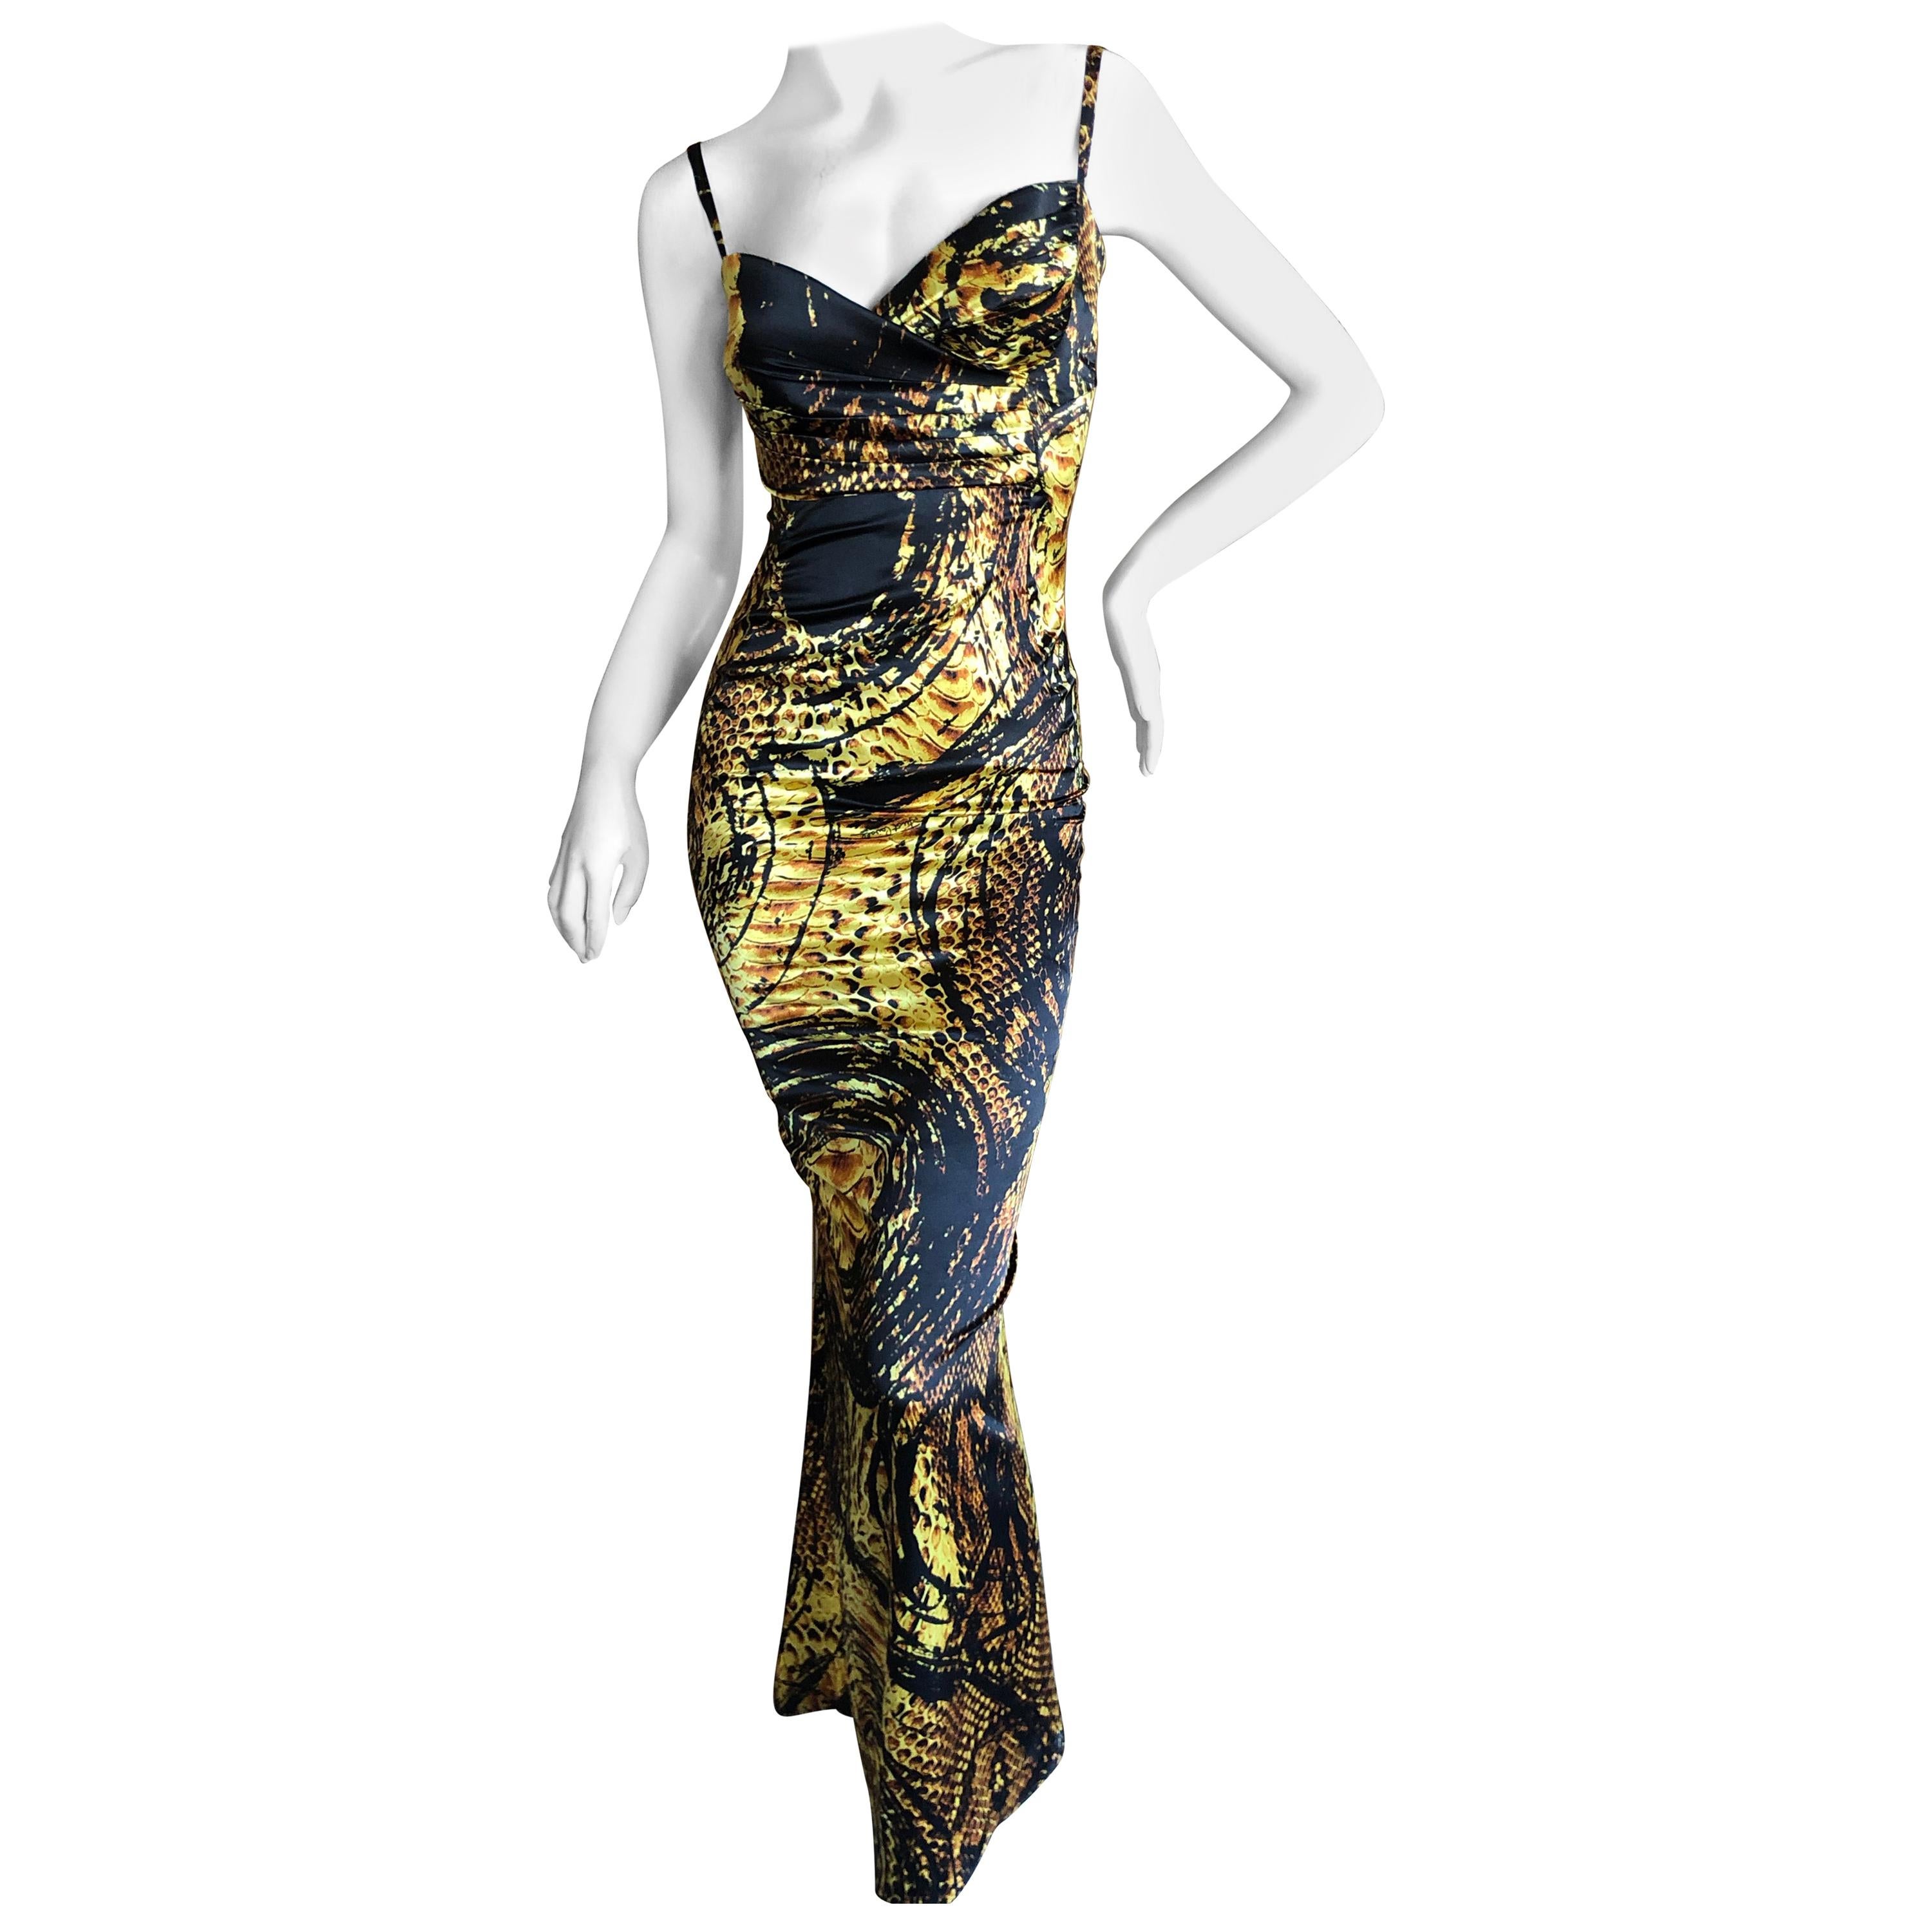 Roberto Cavalli Gold Reptile Print Evening Dress for Just Cavalli For Sale